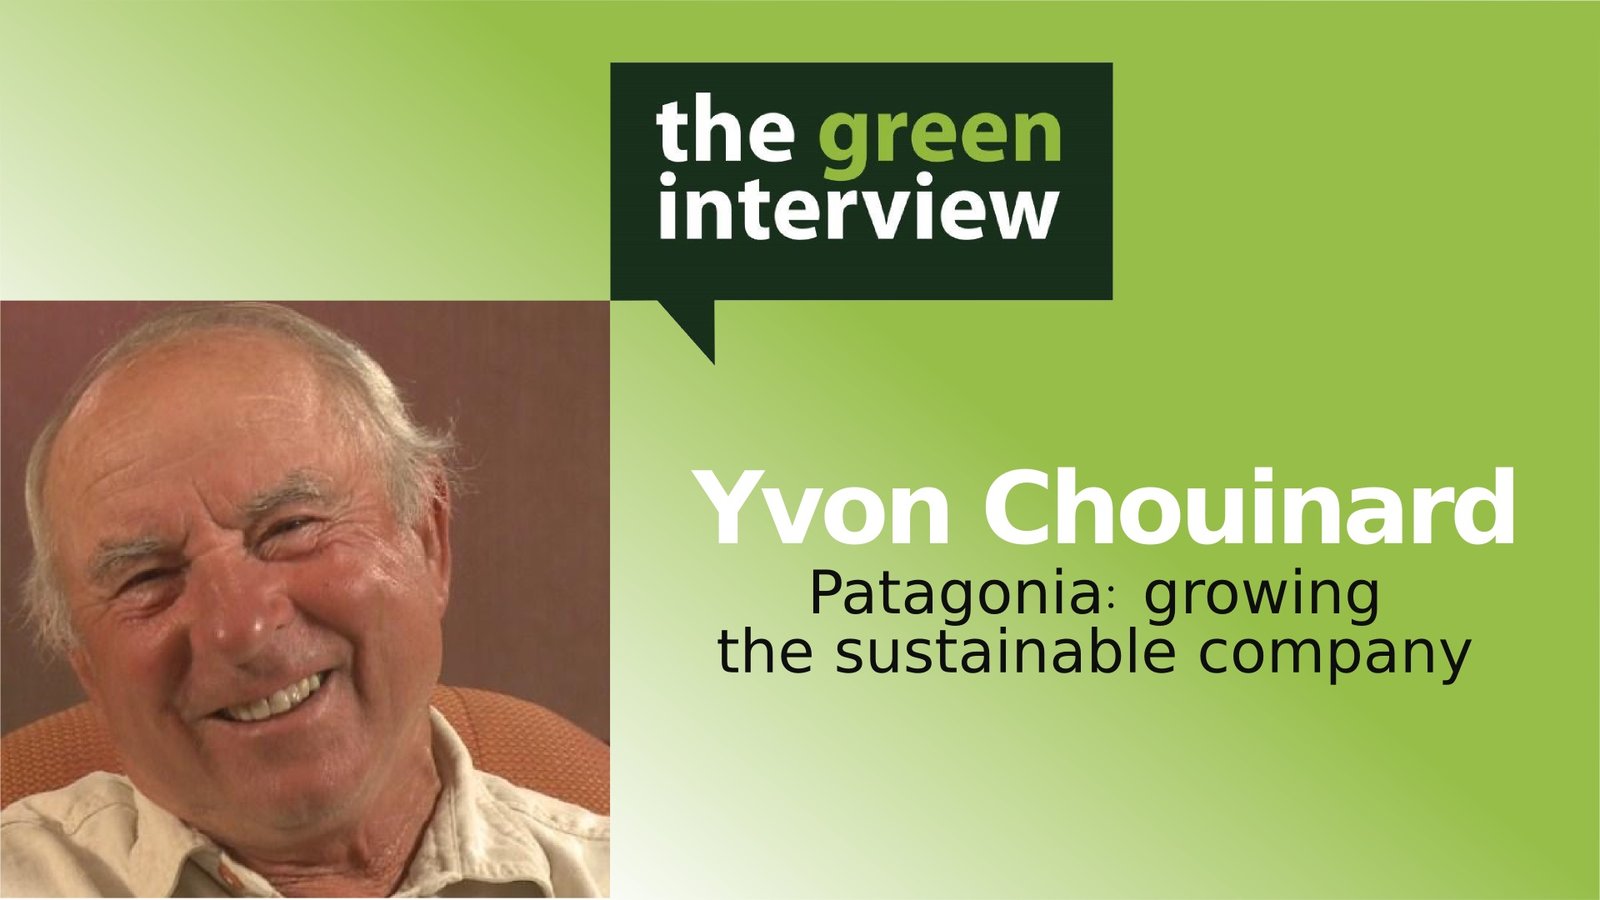 Yvon Chouinard: Patagonia - Growing the Sustainable Company